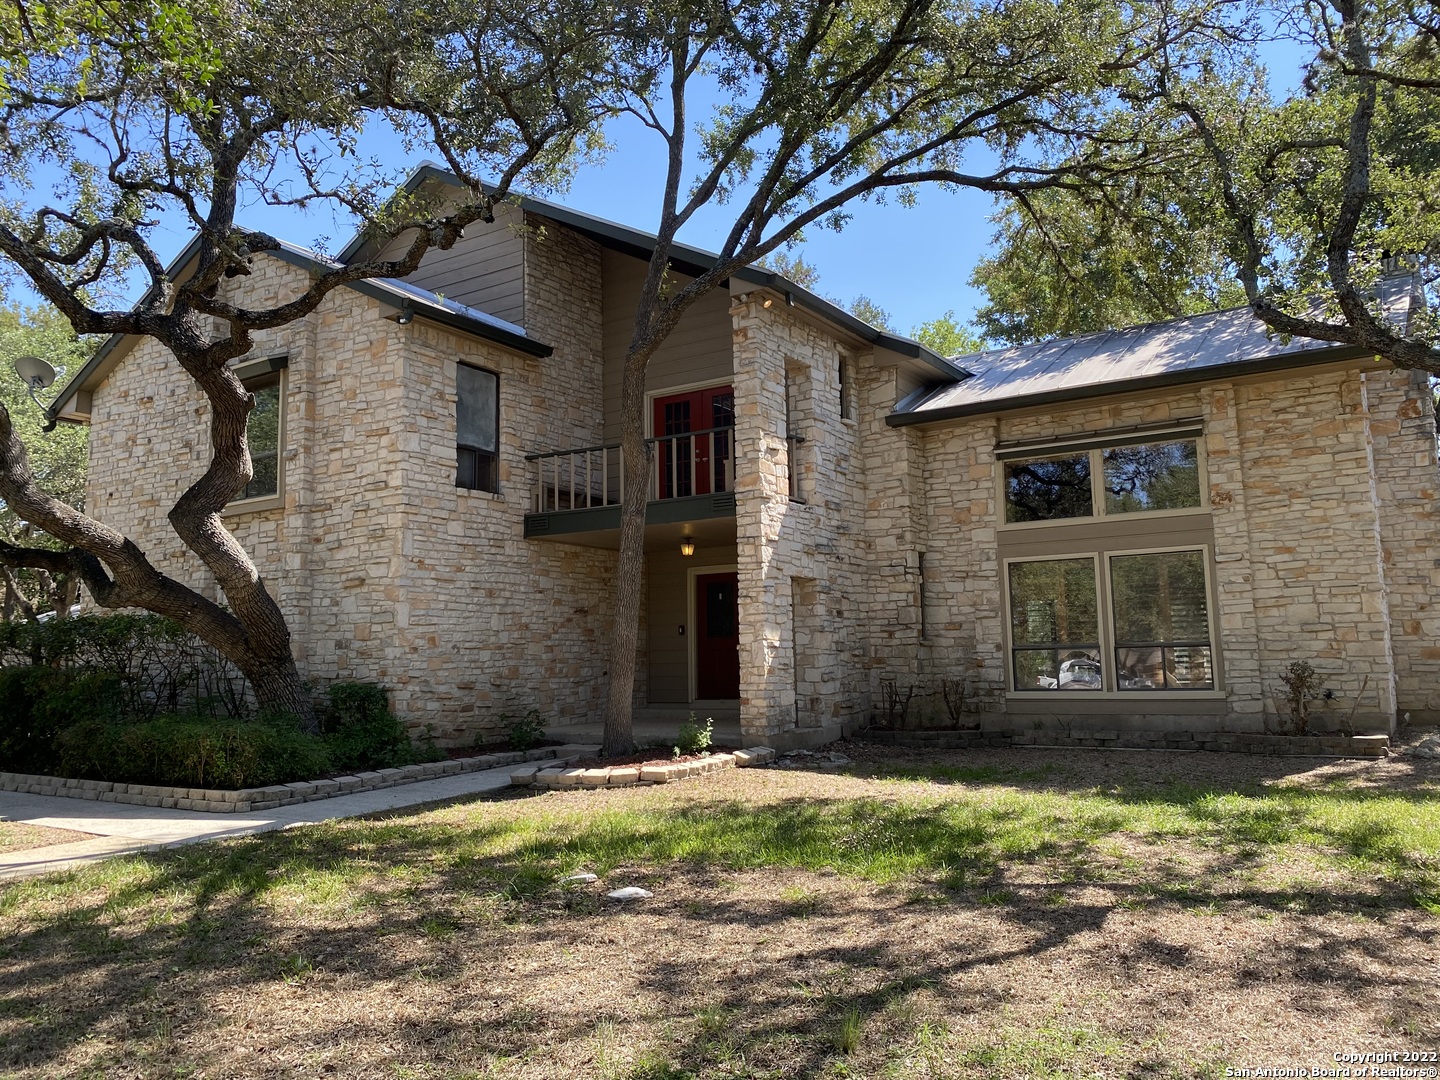 Beautiful home on over 2 acres in one the most desirable neighborhoods. Enjoy the beauty of Hill Country Village, the large lots and tons of wildlife! This home is one of only two at the end of a culdesac, so you'll have tons of privacy! Huge living room with high ceilings, large floor to ceiling rock fireplace. Huge kitchen for entertaining with island, warming drawer and tons of cabinet space. Gorgeous hardwood floors and built in cabinets. Loft bonus room with overlooking balcony, large bedrooms with wal